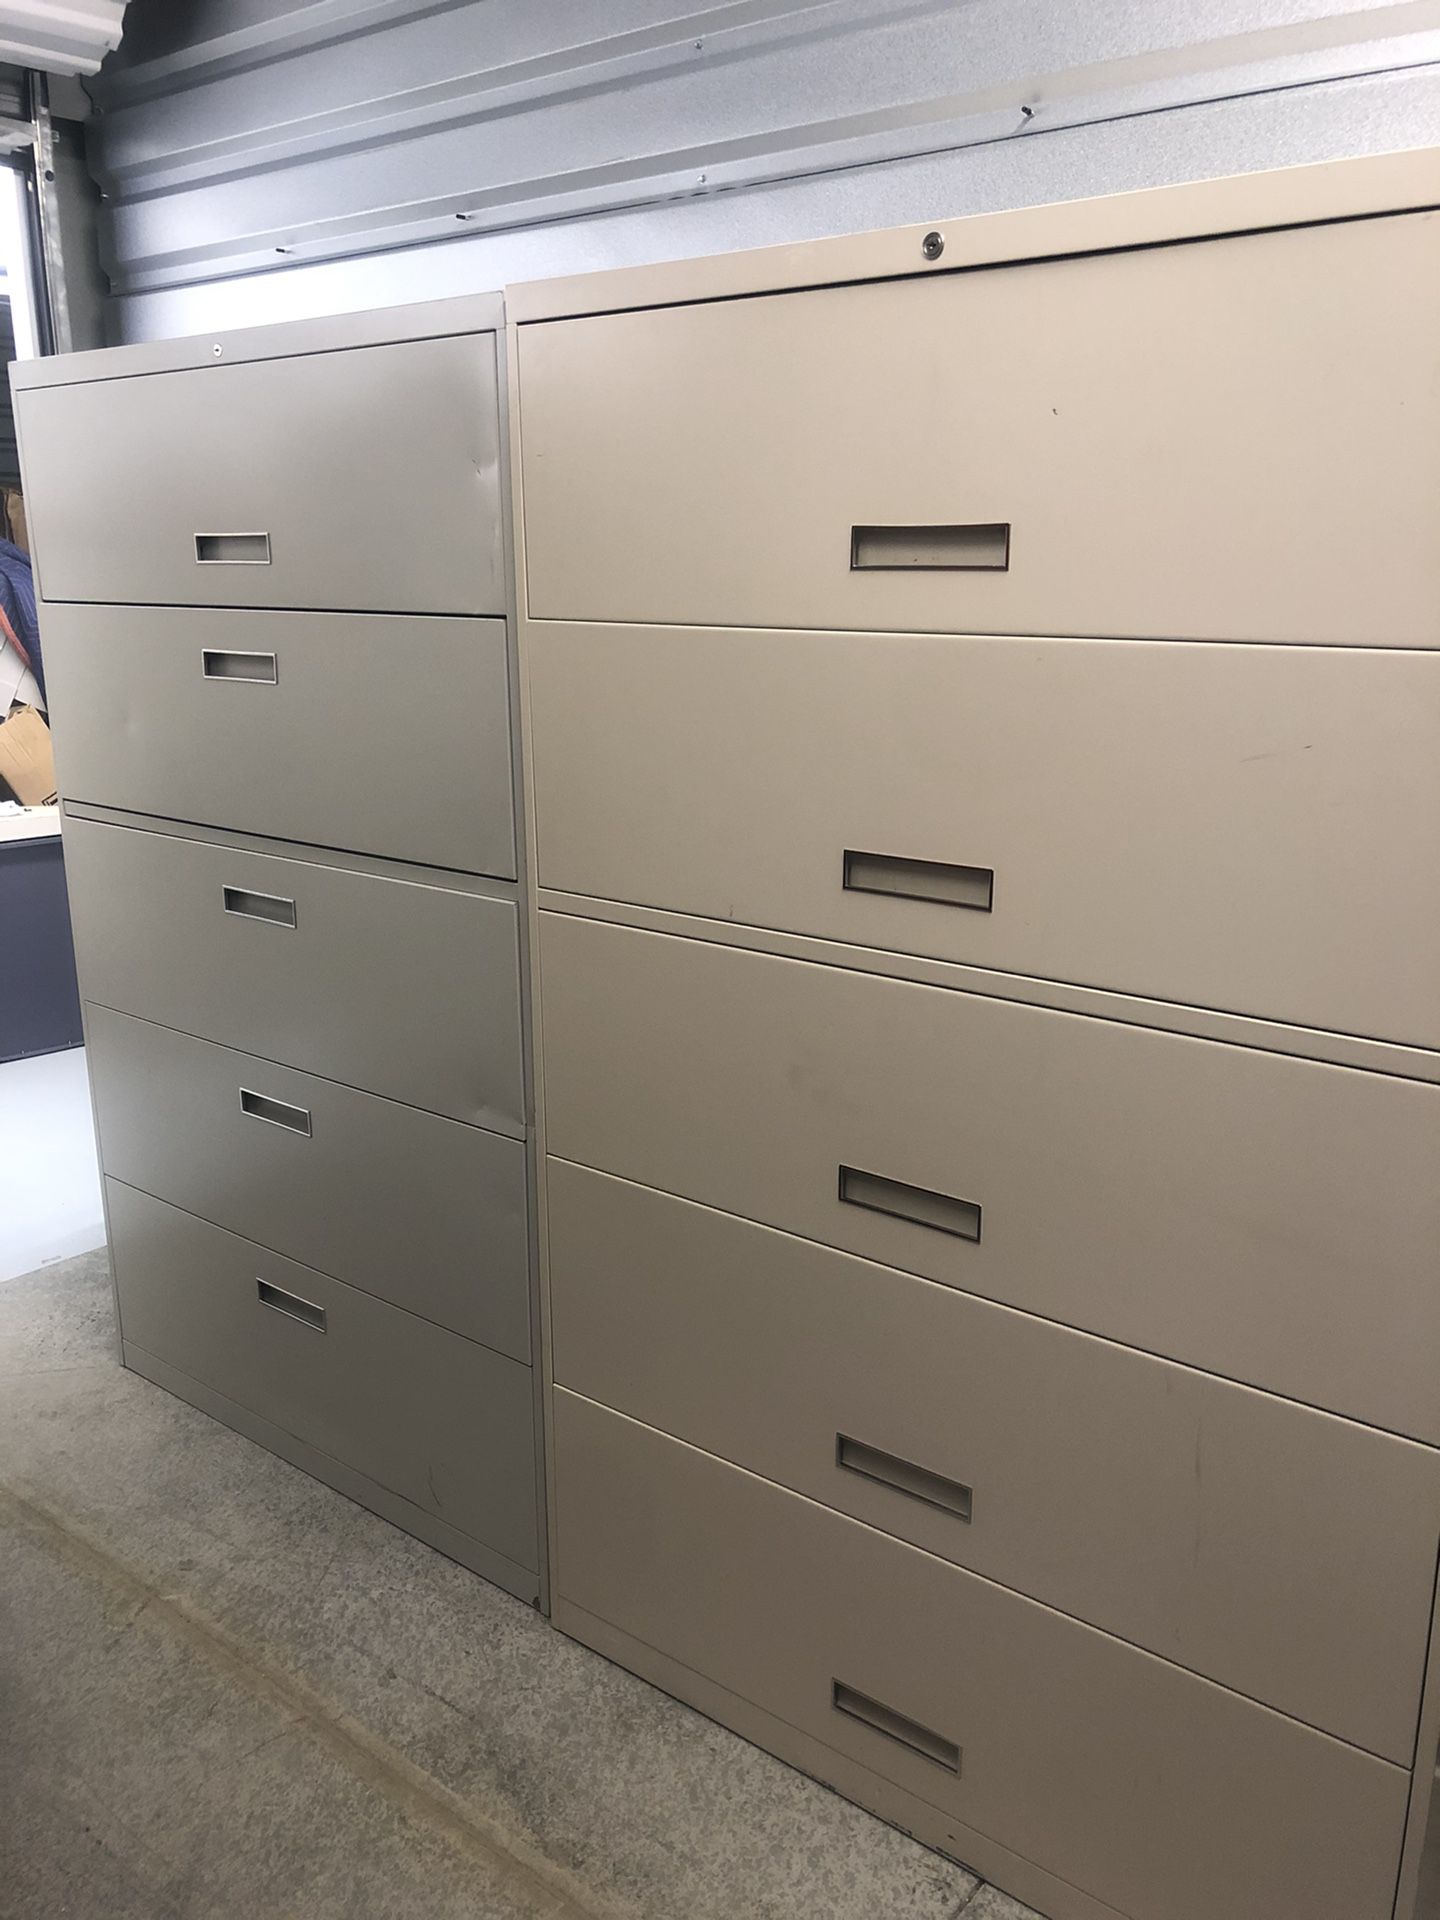 3(5 drawers lateral commercial grade metal filing cabinets in good condition price per one cabinet